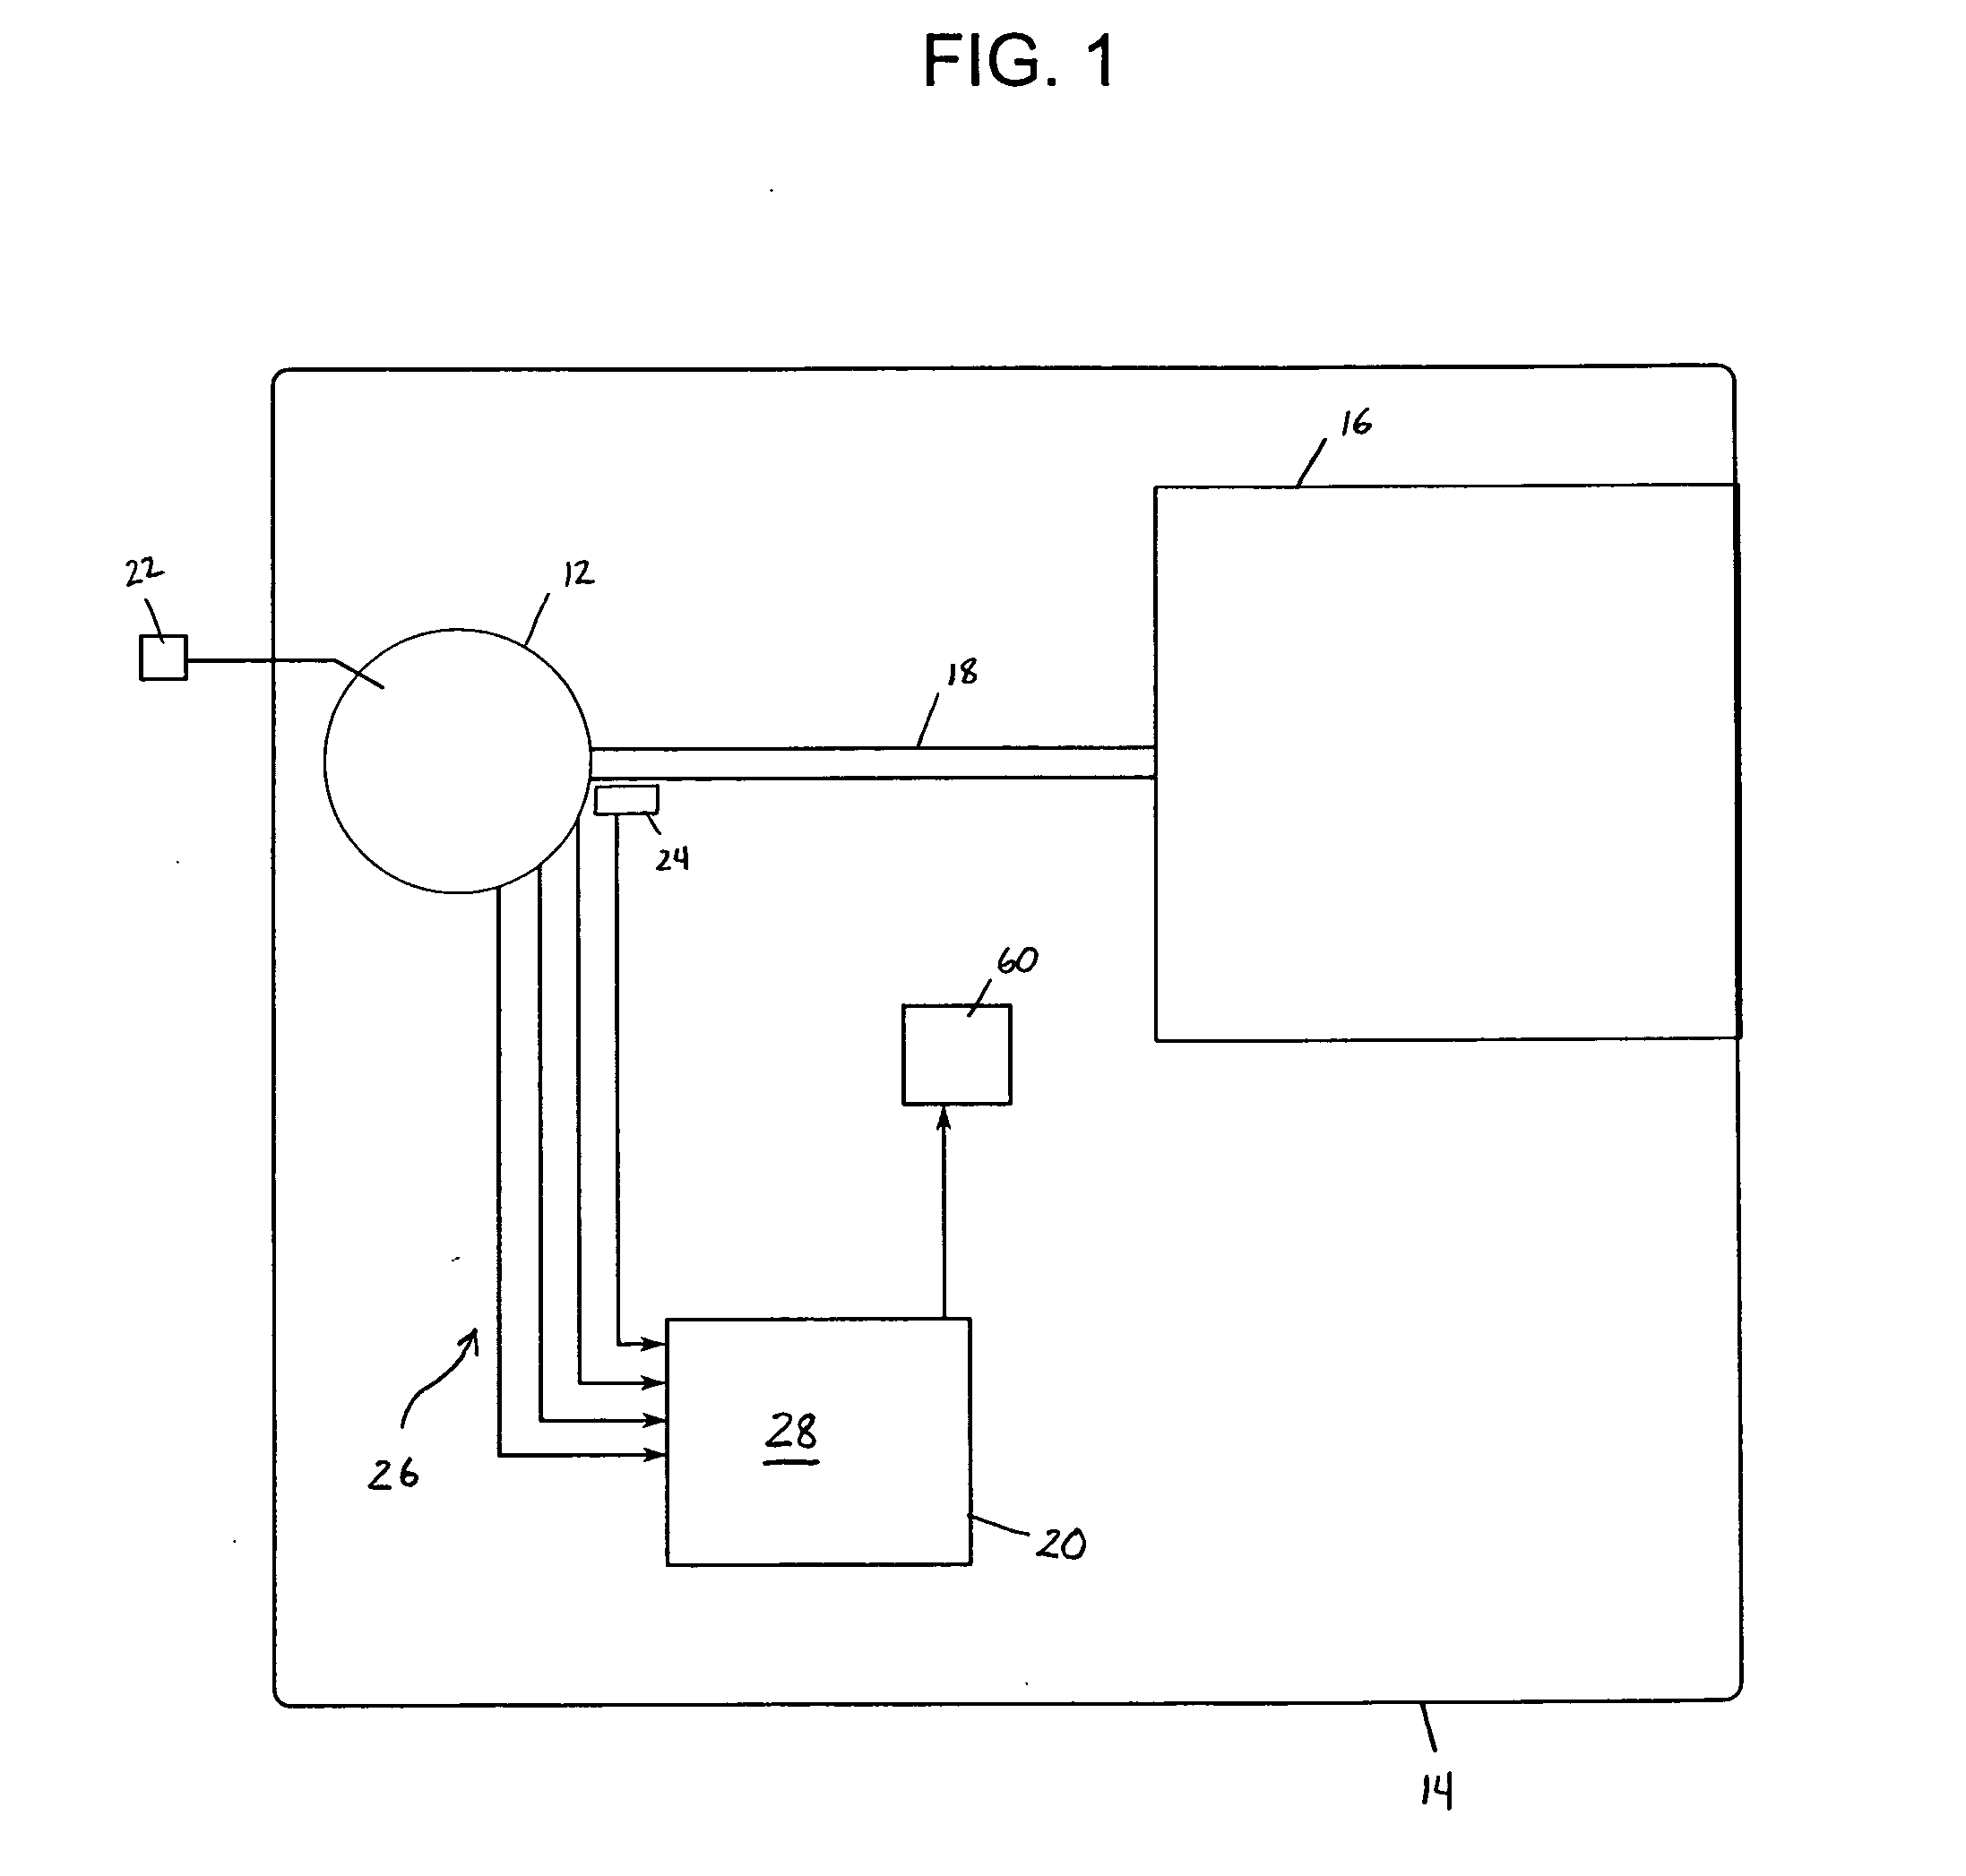 Systems and methods for detecting out-of-balance conditions in electronically controlled motors